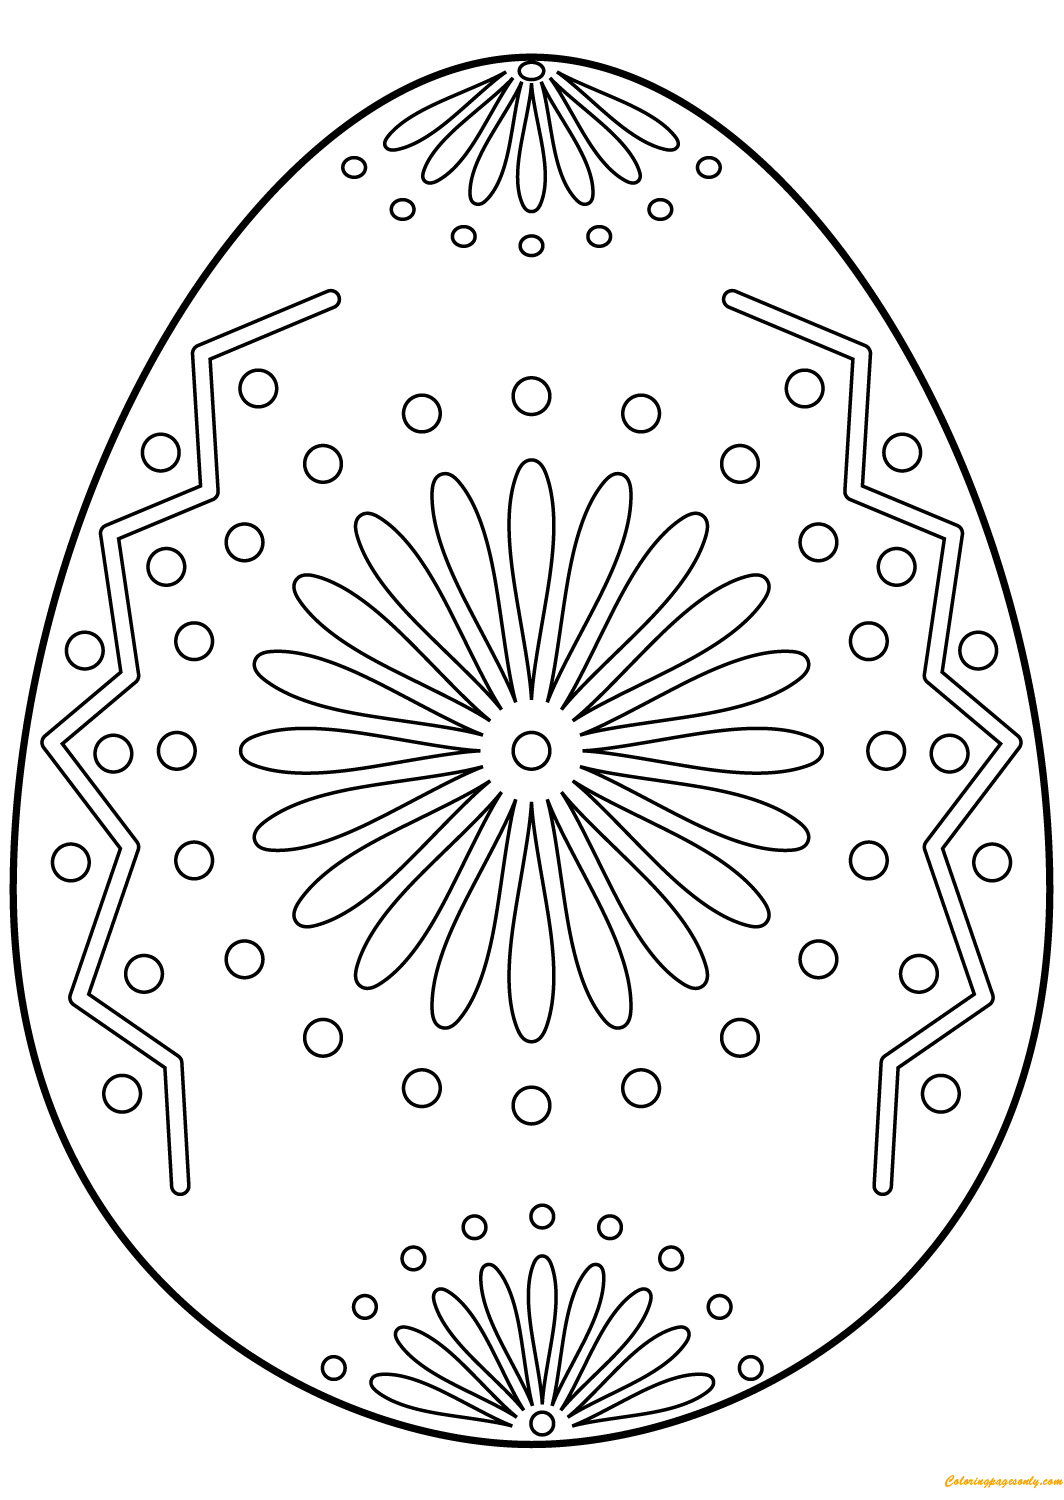 Floral Ornament For Easter Egg from Easter Eggs